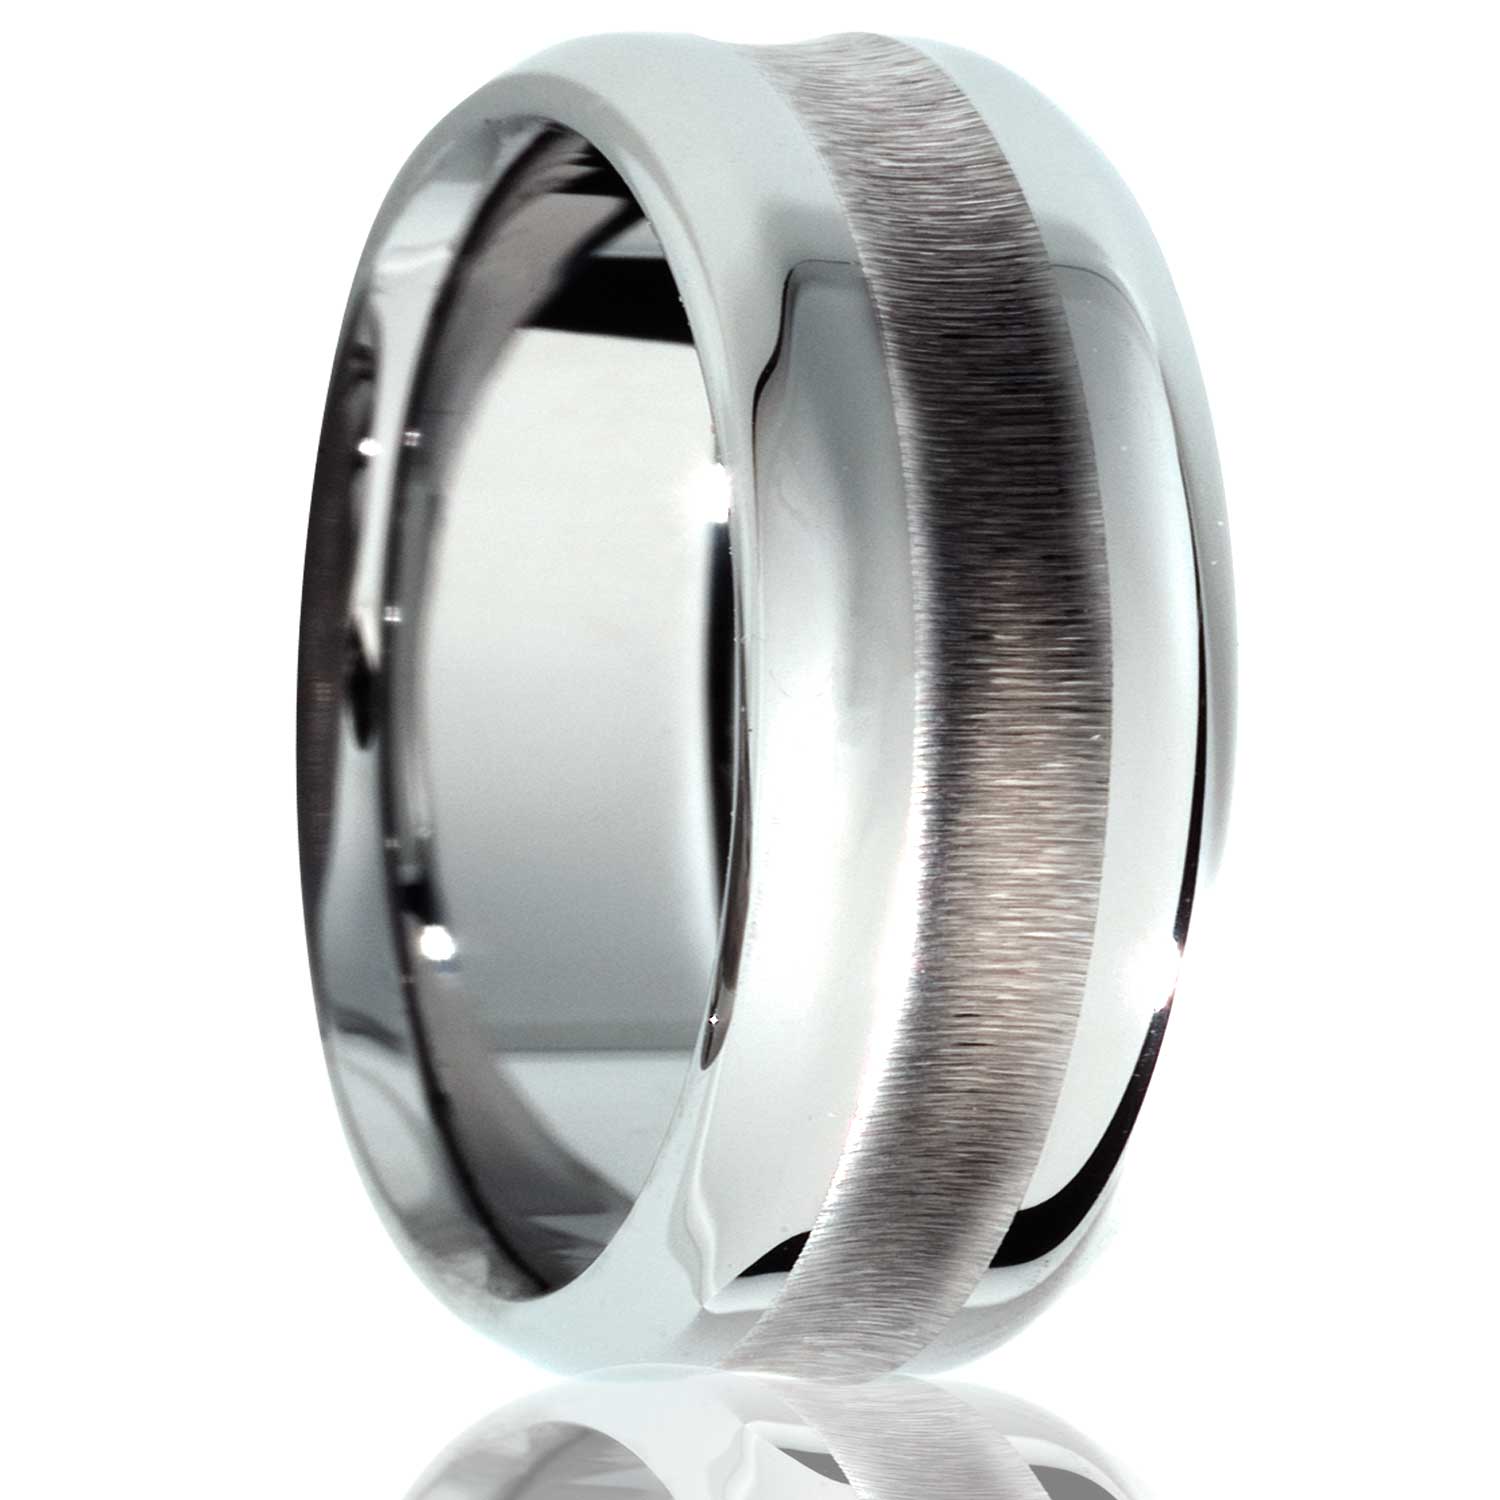 A tungsten wedding band with beveled edges displayed on a neutral white background.